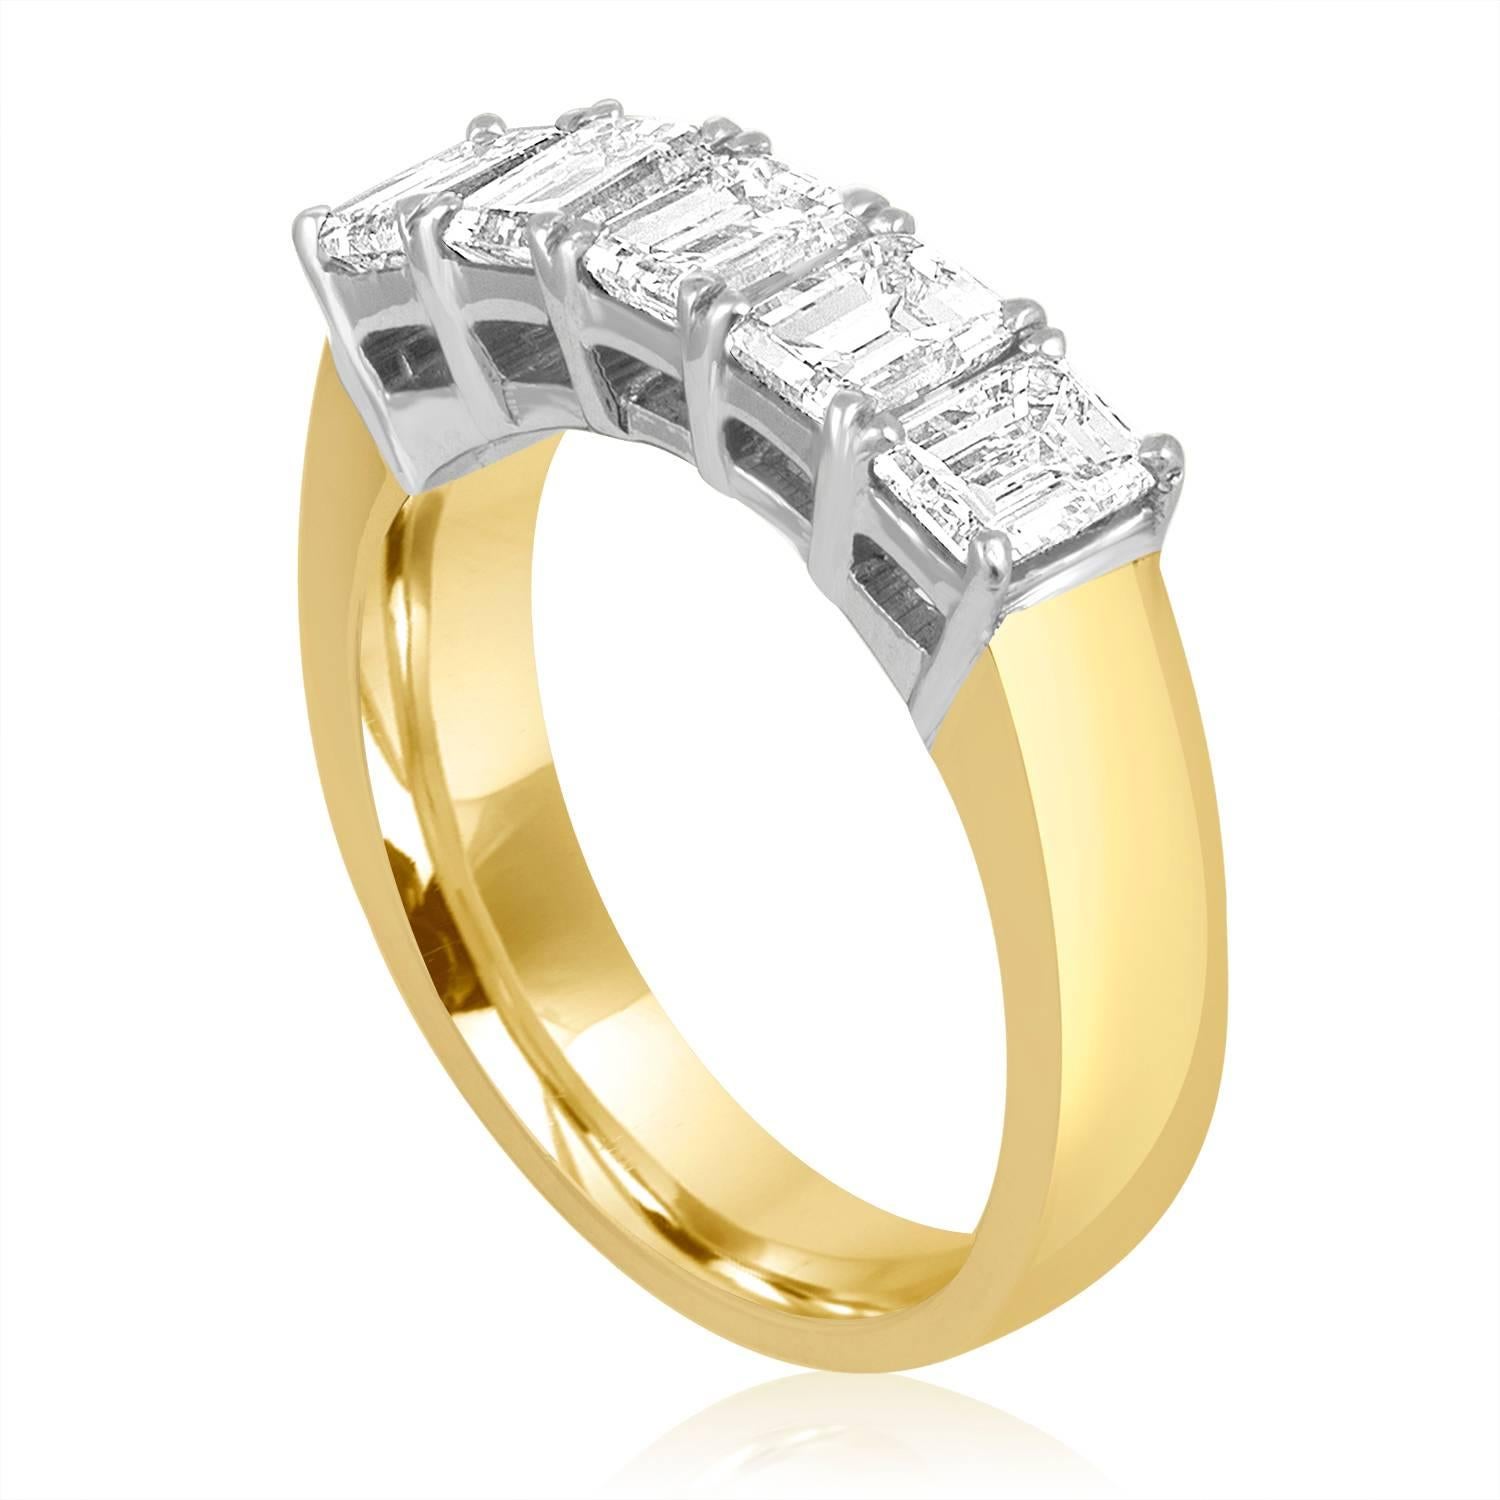 Very Beautiful Diamond Half Band Ring
The ring is 18K Yellow Gold & PLT 950
There are 5 Emerald Cut Diamonds prong set
There are 2.50 Carats In Diamonds F/G VS
The ring is a size 9, sizable. 
The band is 5.37 mm wide. 
The ring weighs 11.8 grams.